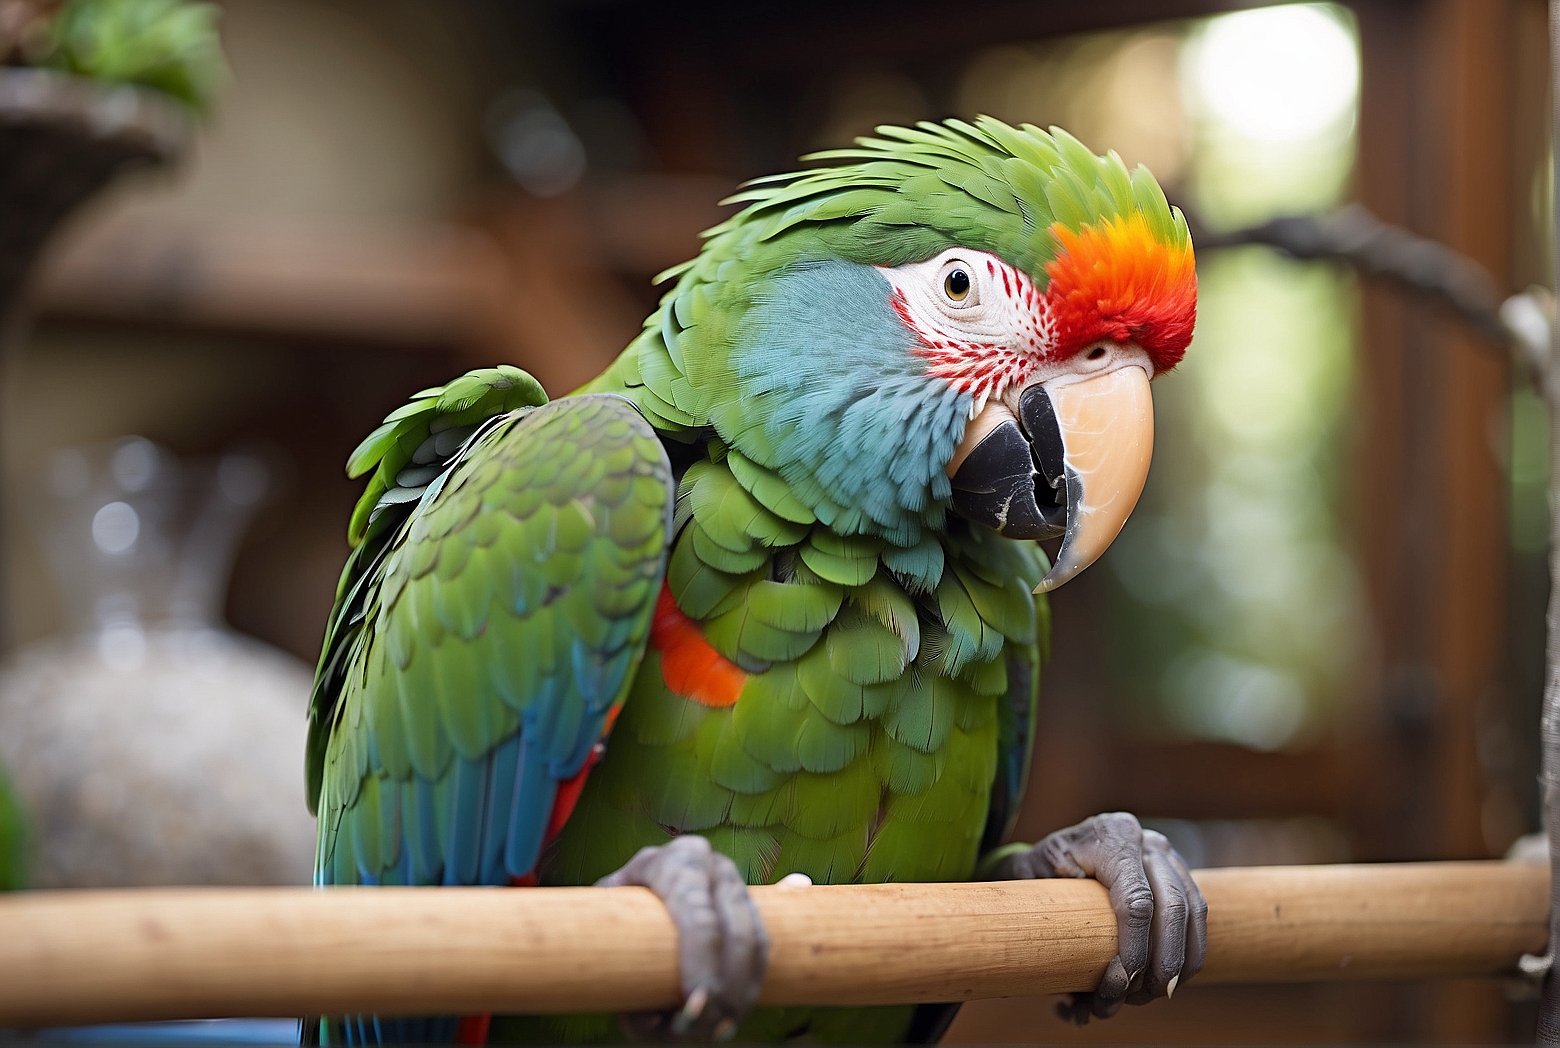 Cleaning Your Parrot’s Cage: A Step-by-Step Guide